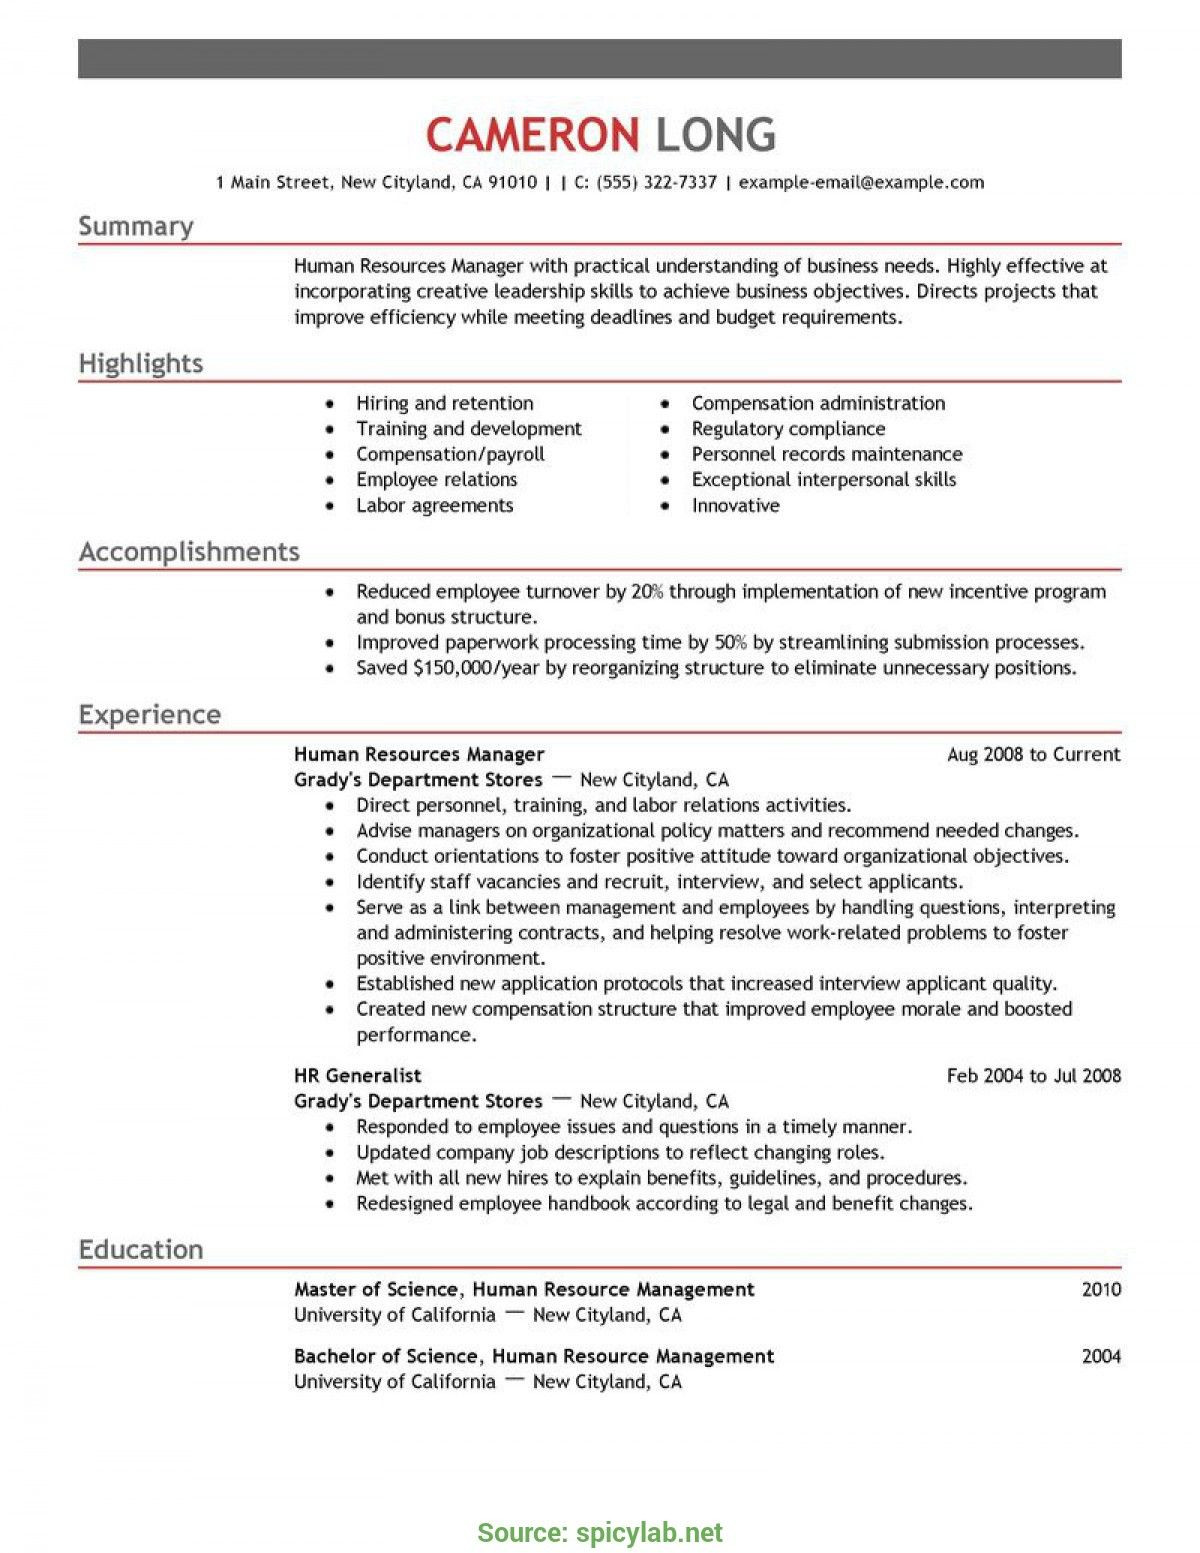 Compensation and Benefits Manager Resume Sample Recruiter Sample Resume Human Resources 2021 – Shefalitayal